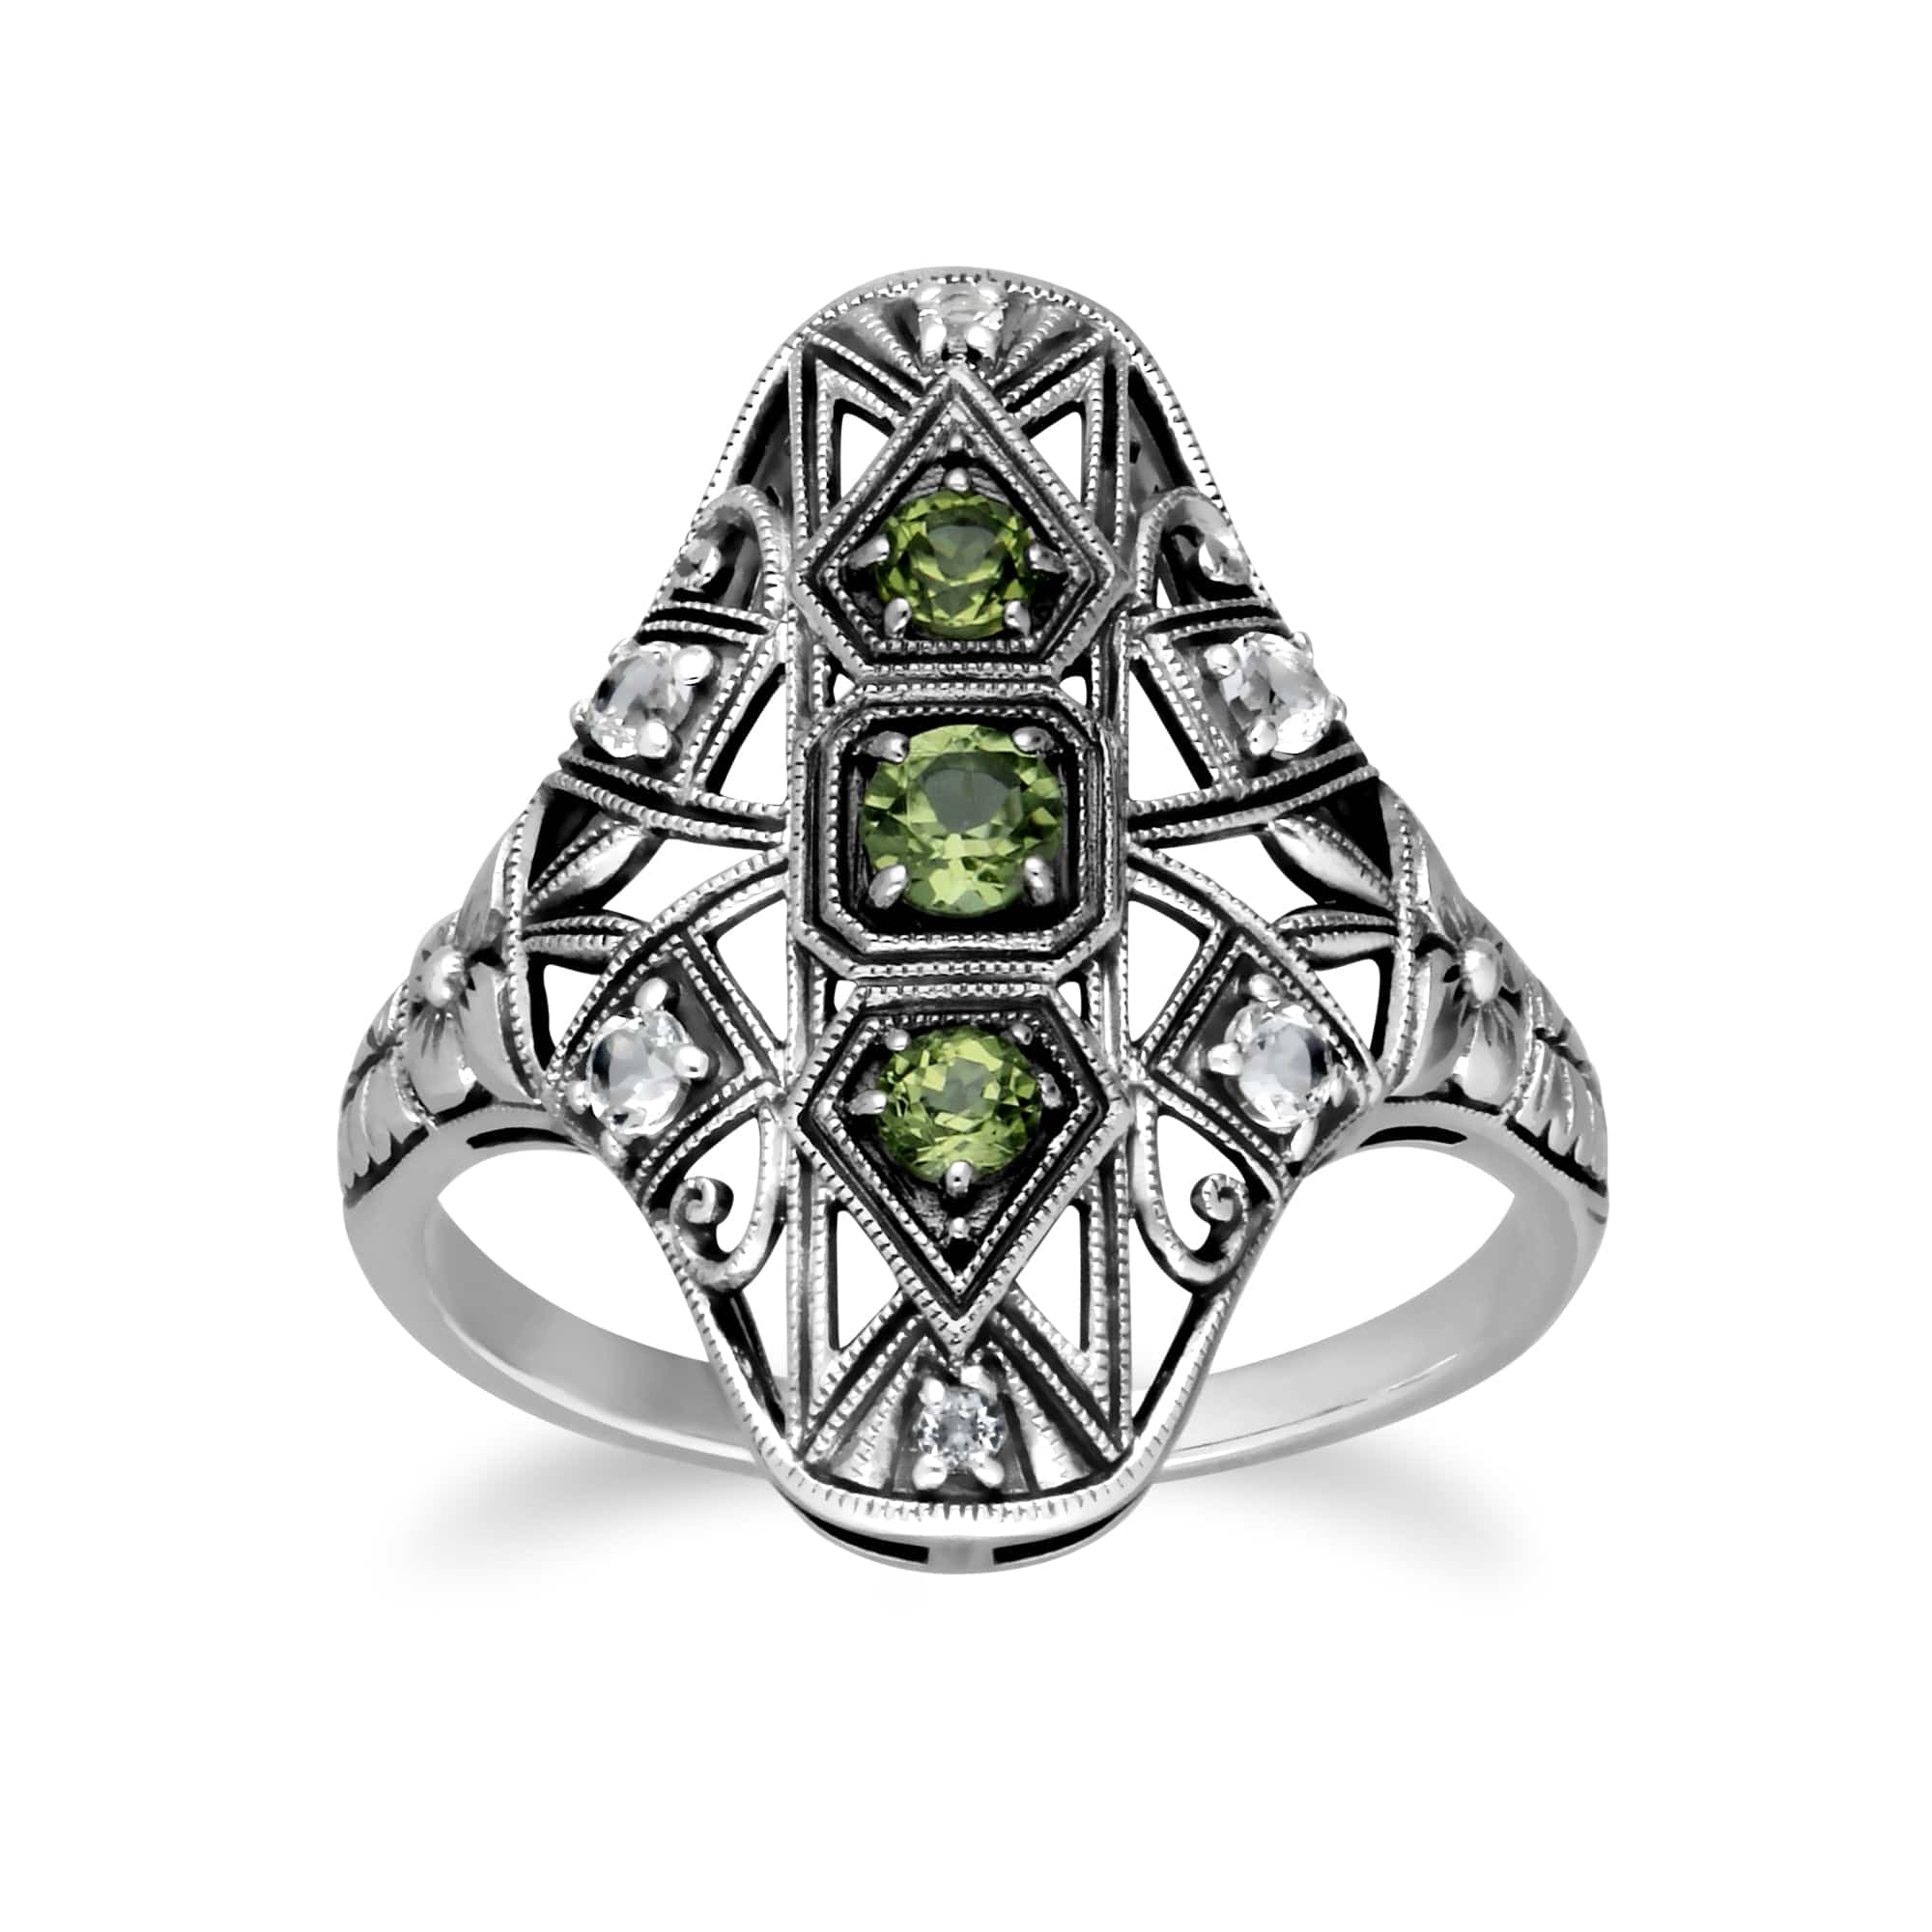 241R210604925 Art Nouveau Style Round Peridot & White Topaz Statement Ring in 925 Sterling Silver 1